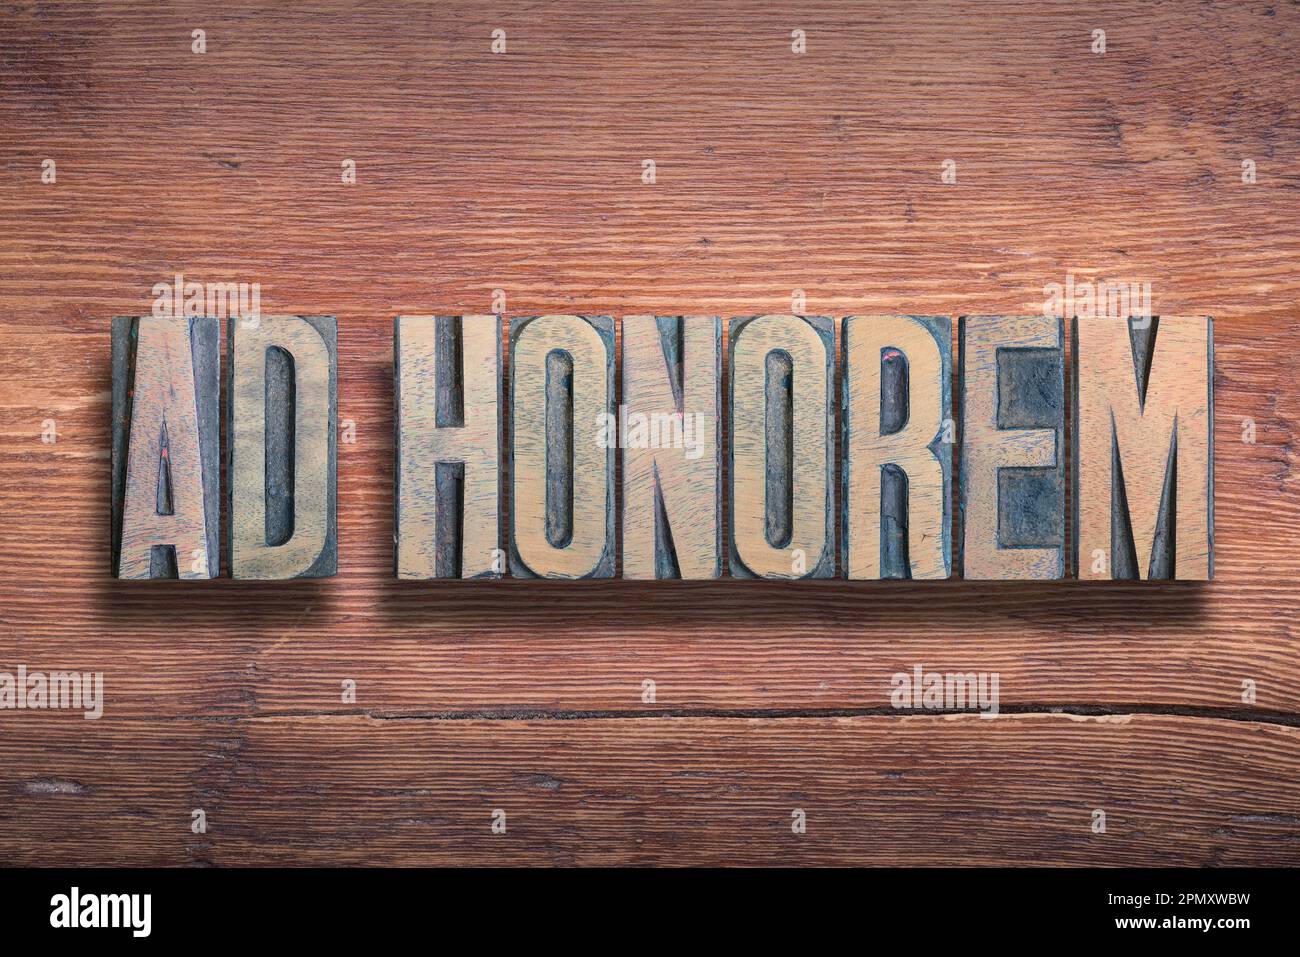 ad honorem ancient Latin saying meaning - to honor, combined on vintage varnished wooden surface Stock Photo